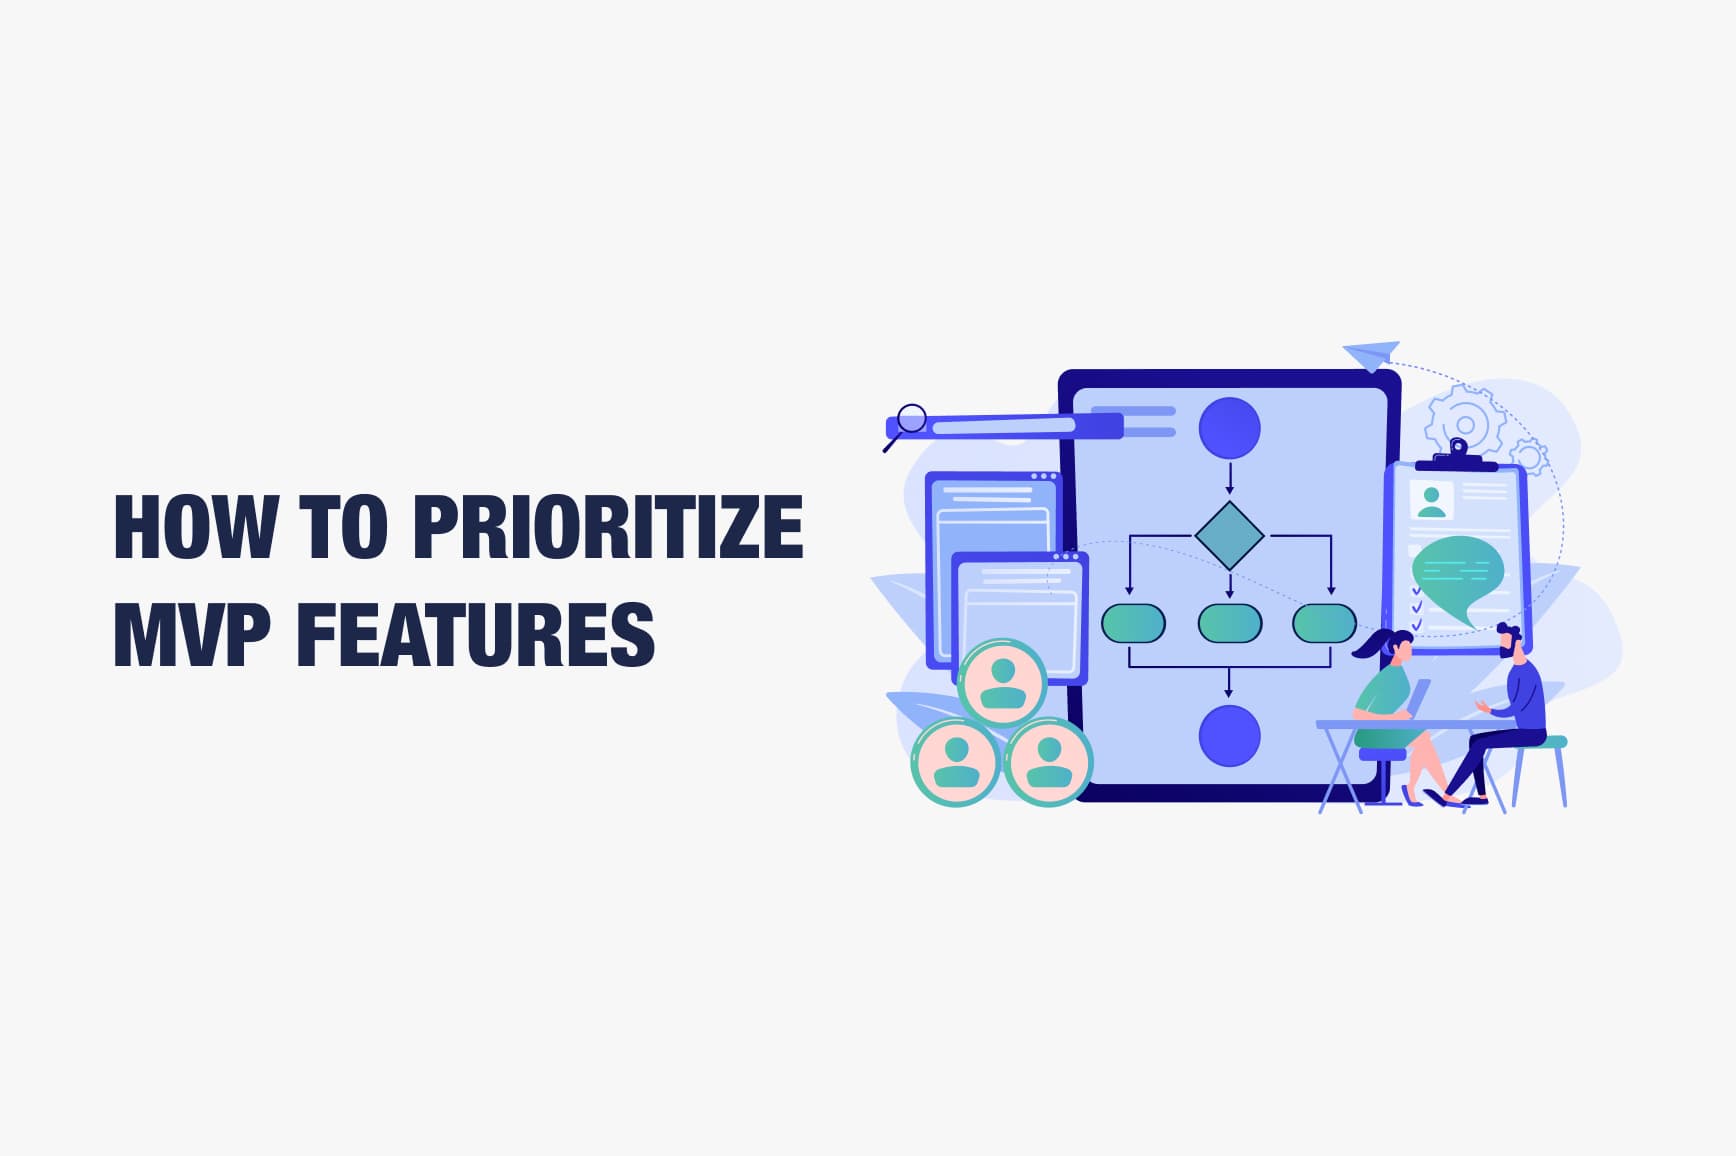 How To Prioritize MVP Features